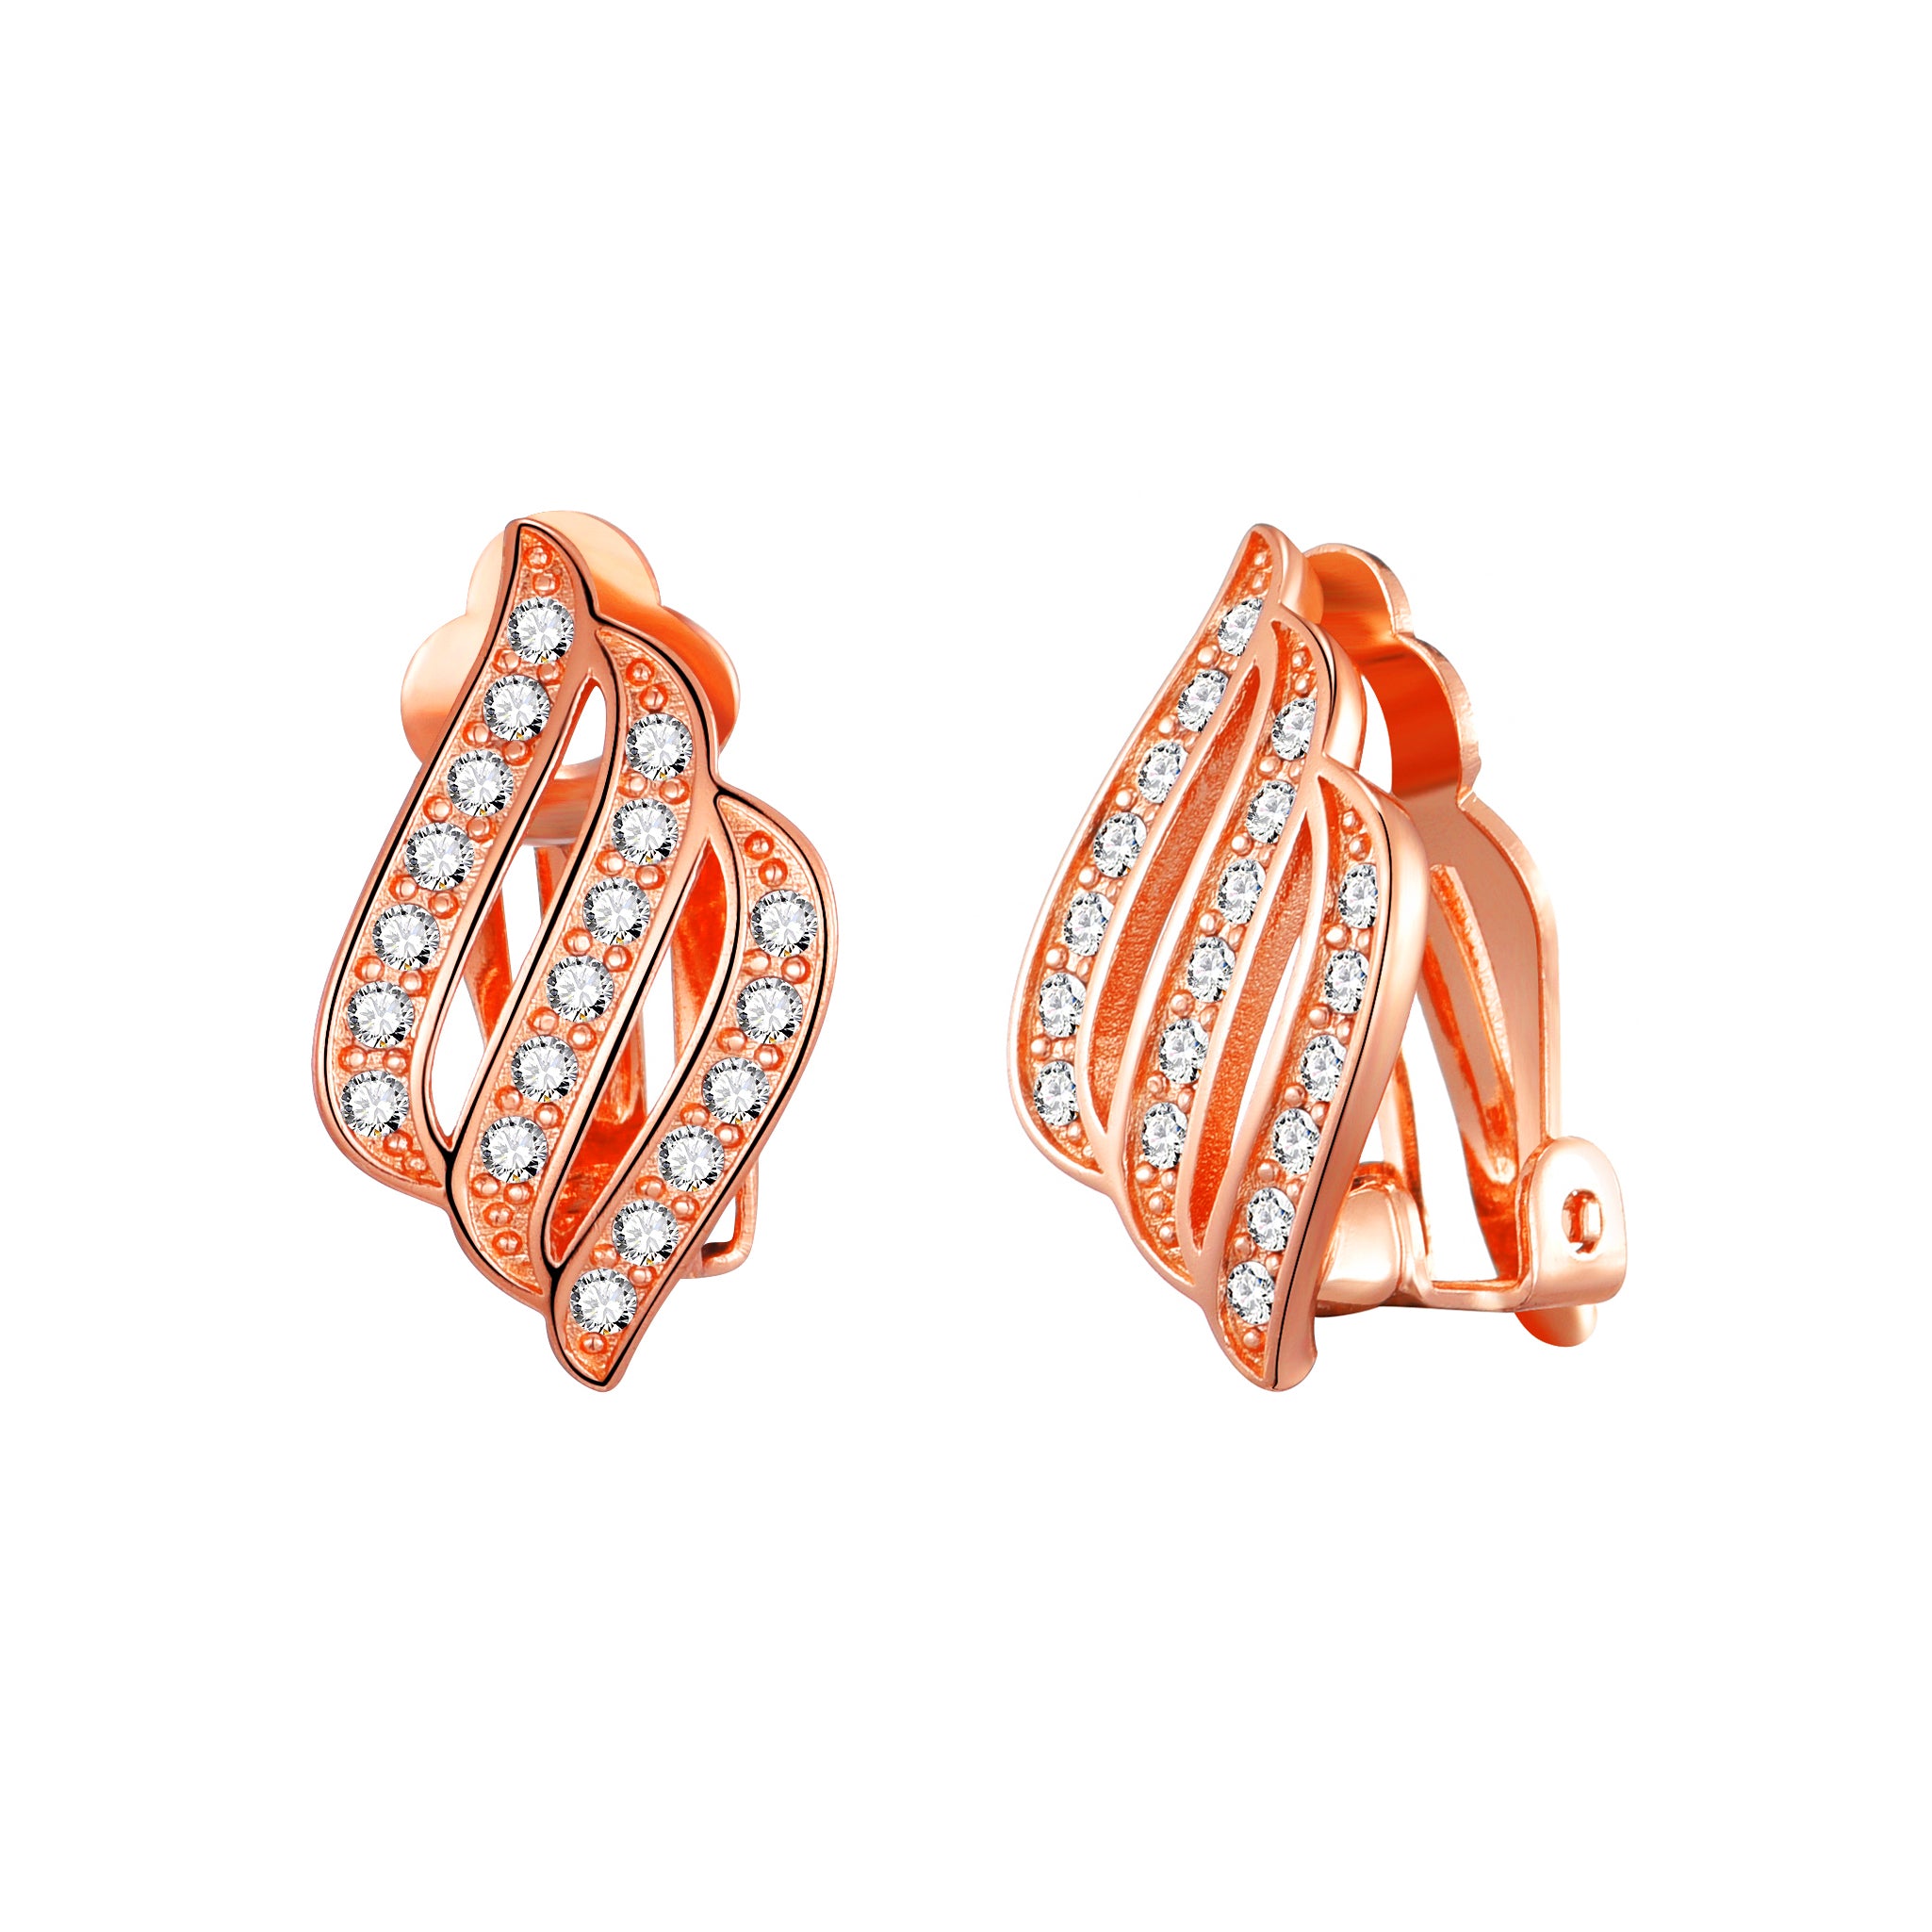 Rose Gold Plated Triple Row Clip On Earrings Created with Zircondia® Crystals